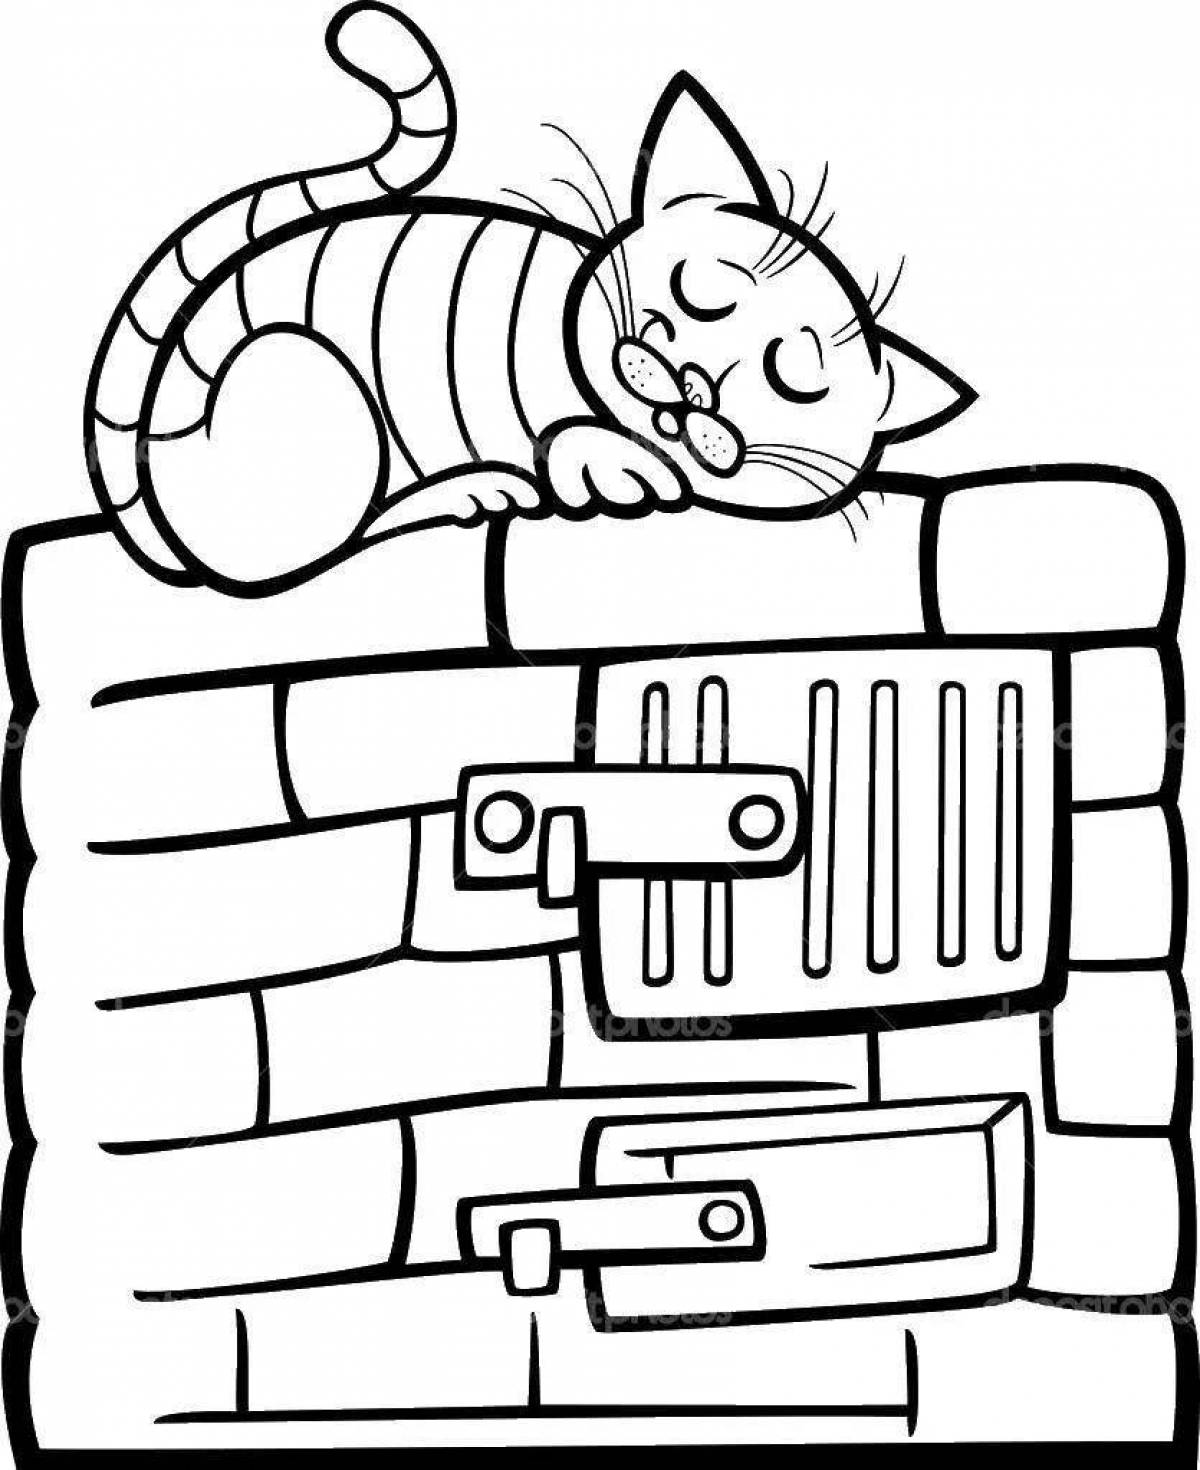 Sleeping kitty coloring page